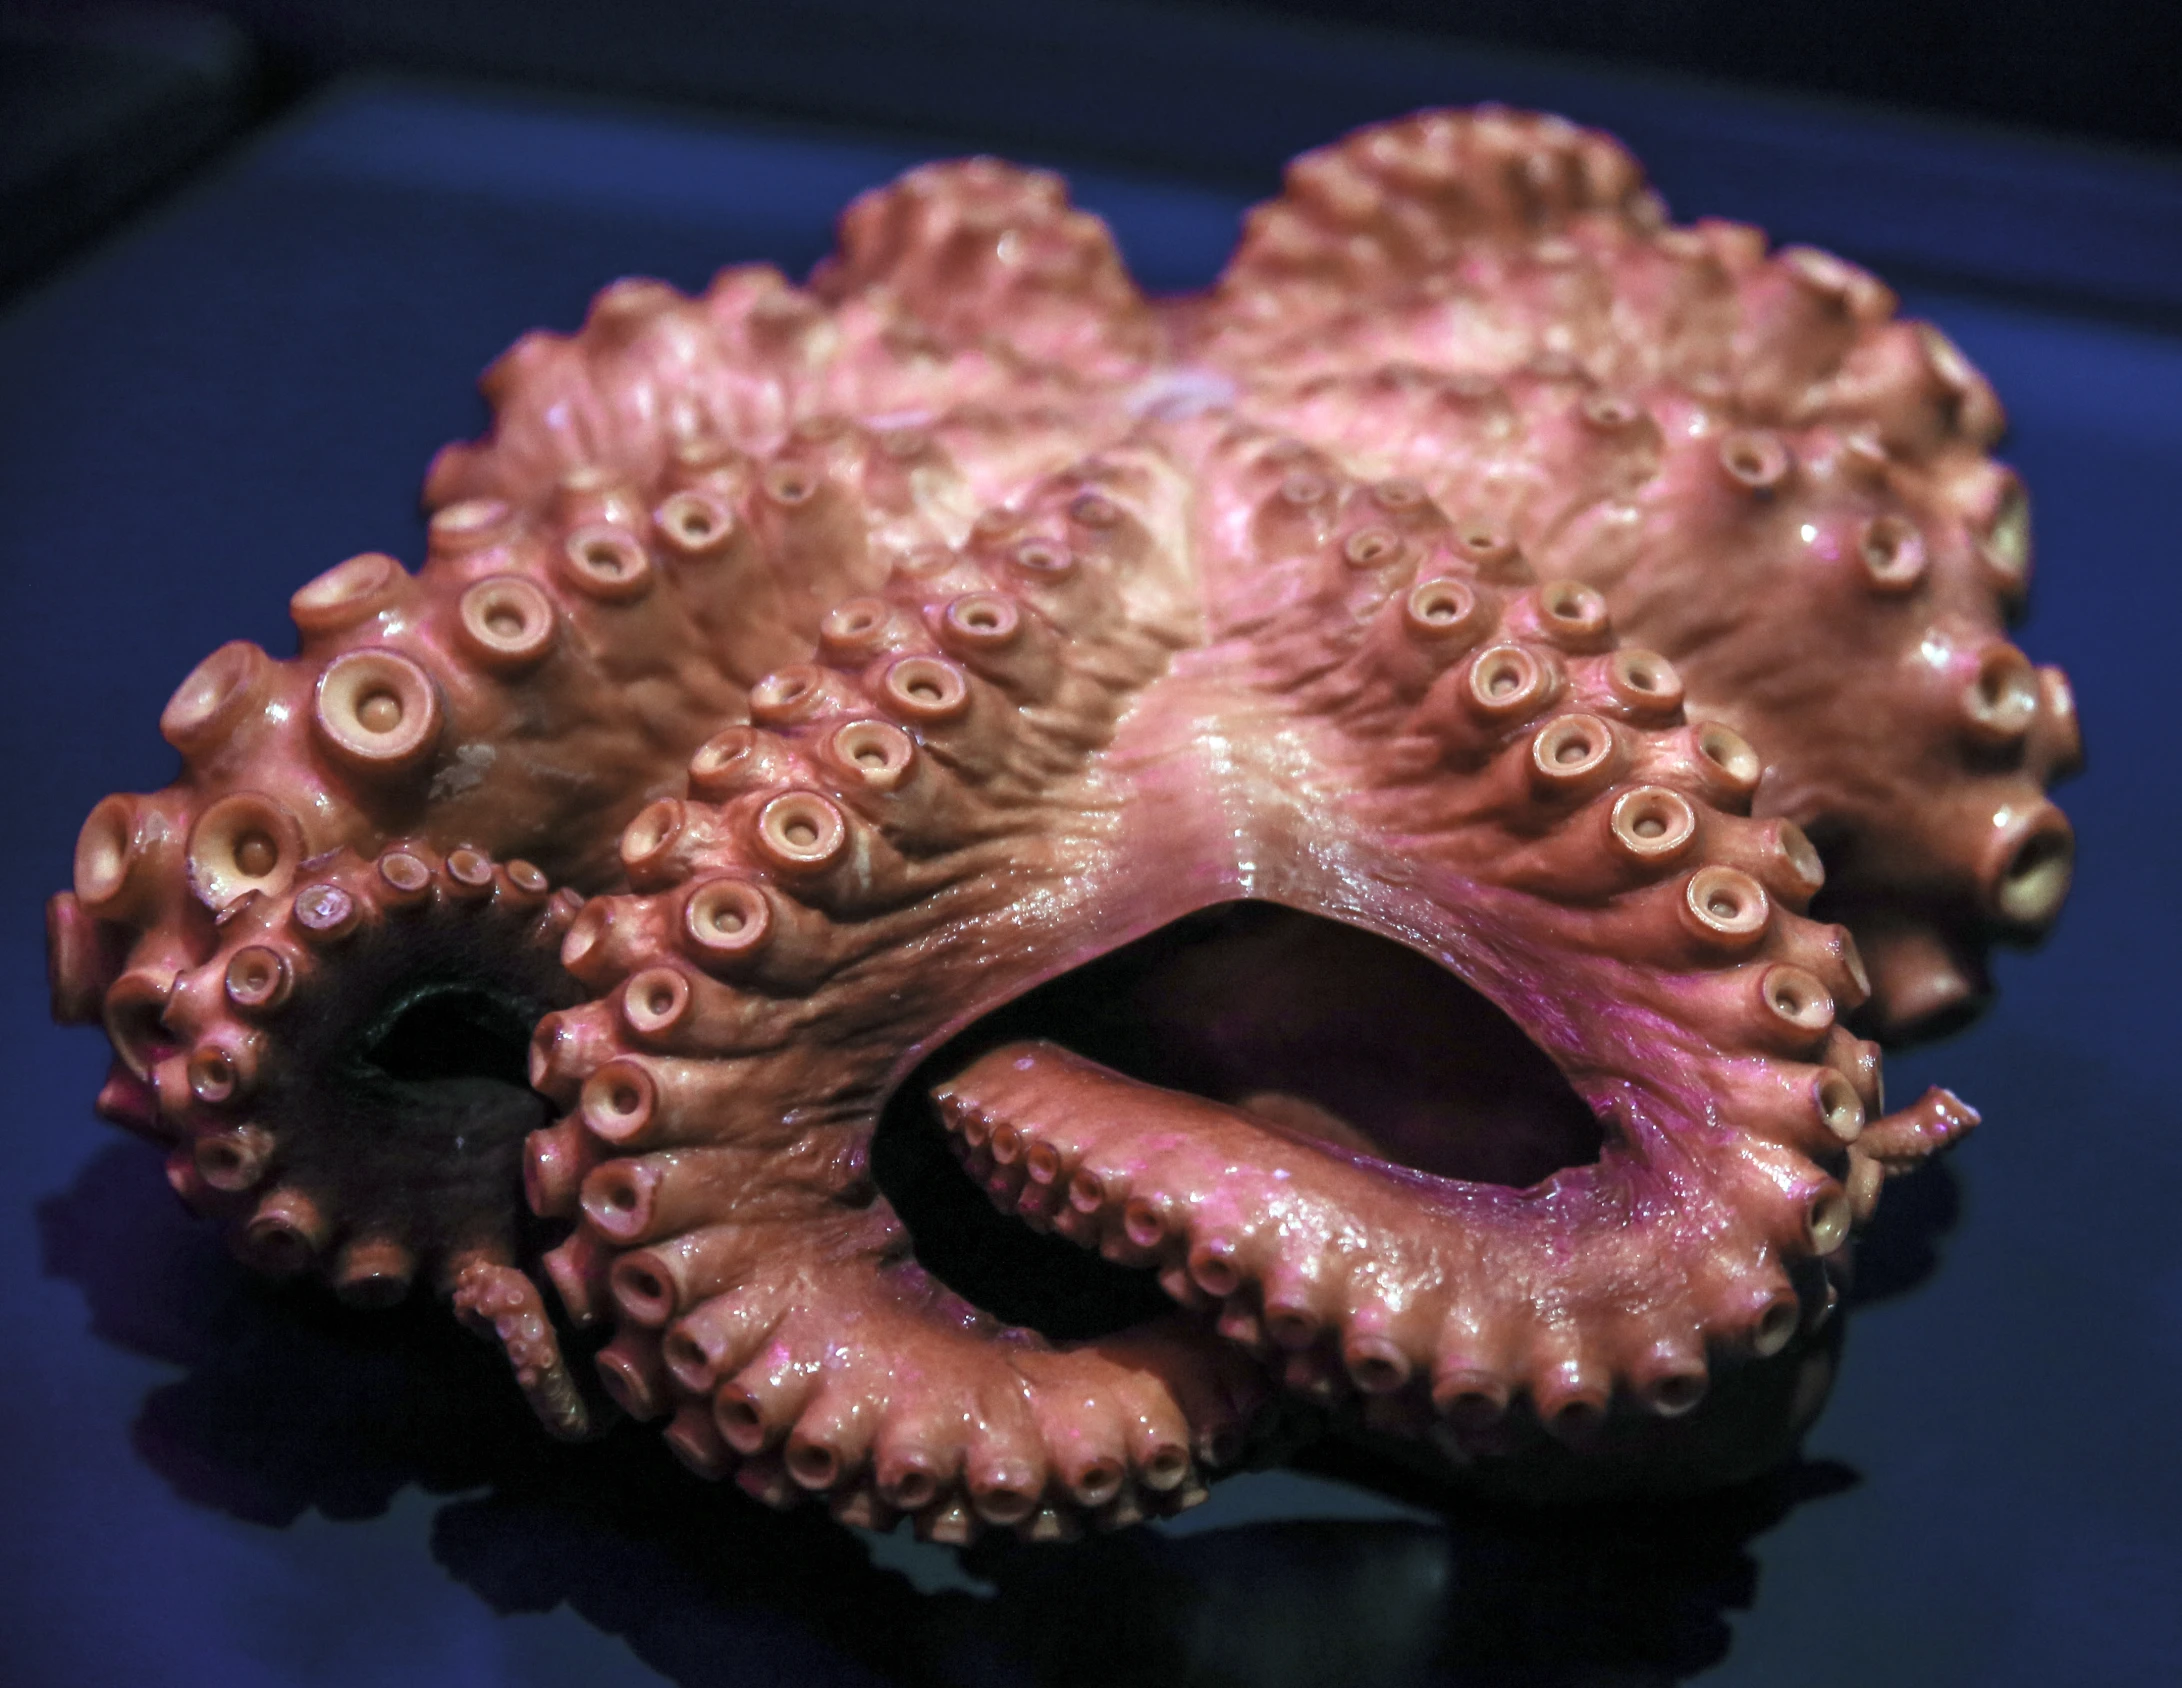 an octo is sitting on the table with its mouth open